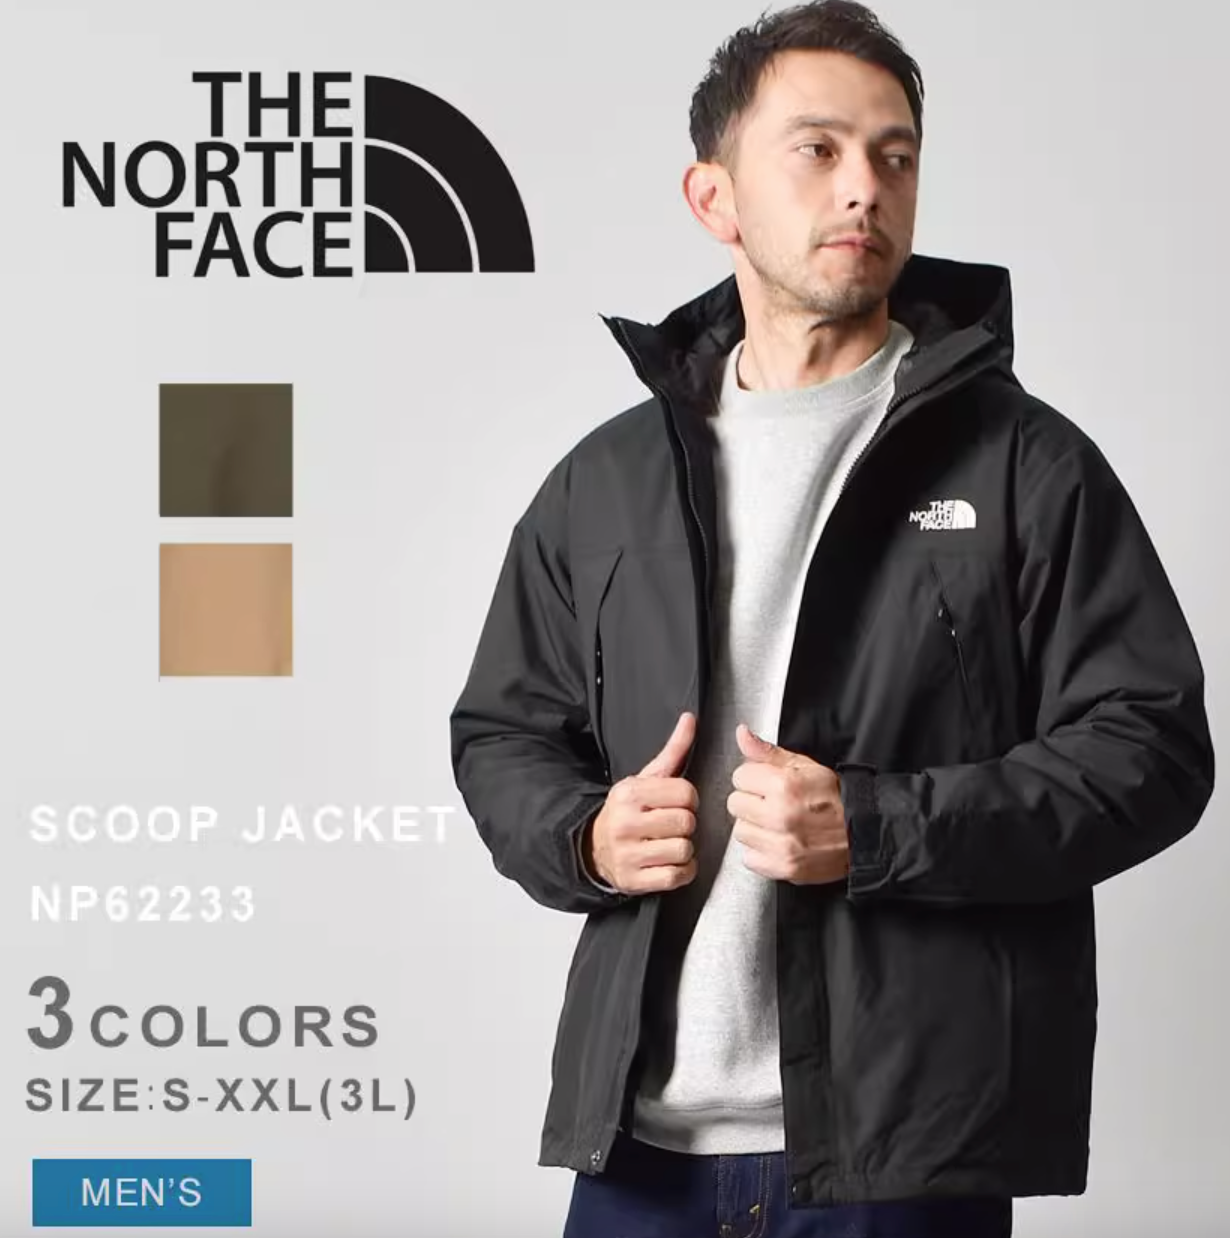 The North Face 北面Scoop Jacket 男士户外保暖夹克NP62233 ￥1089 - 逛丢